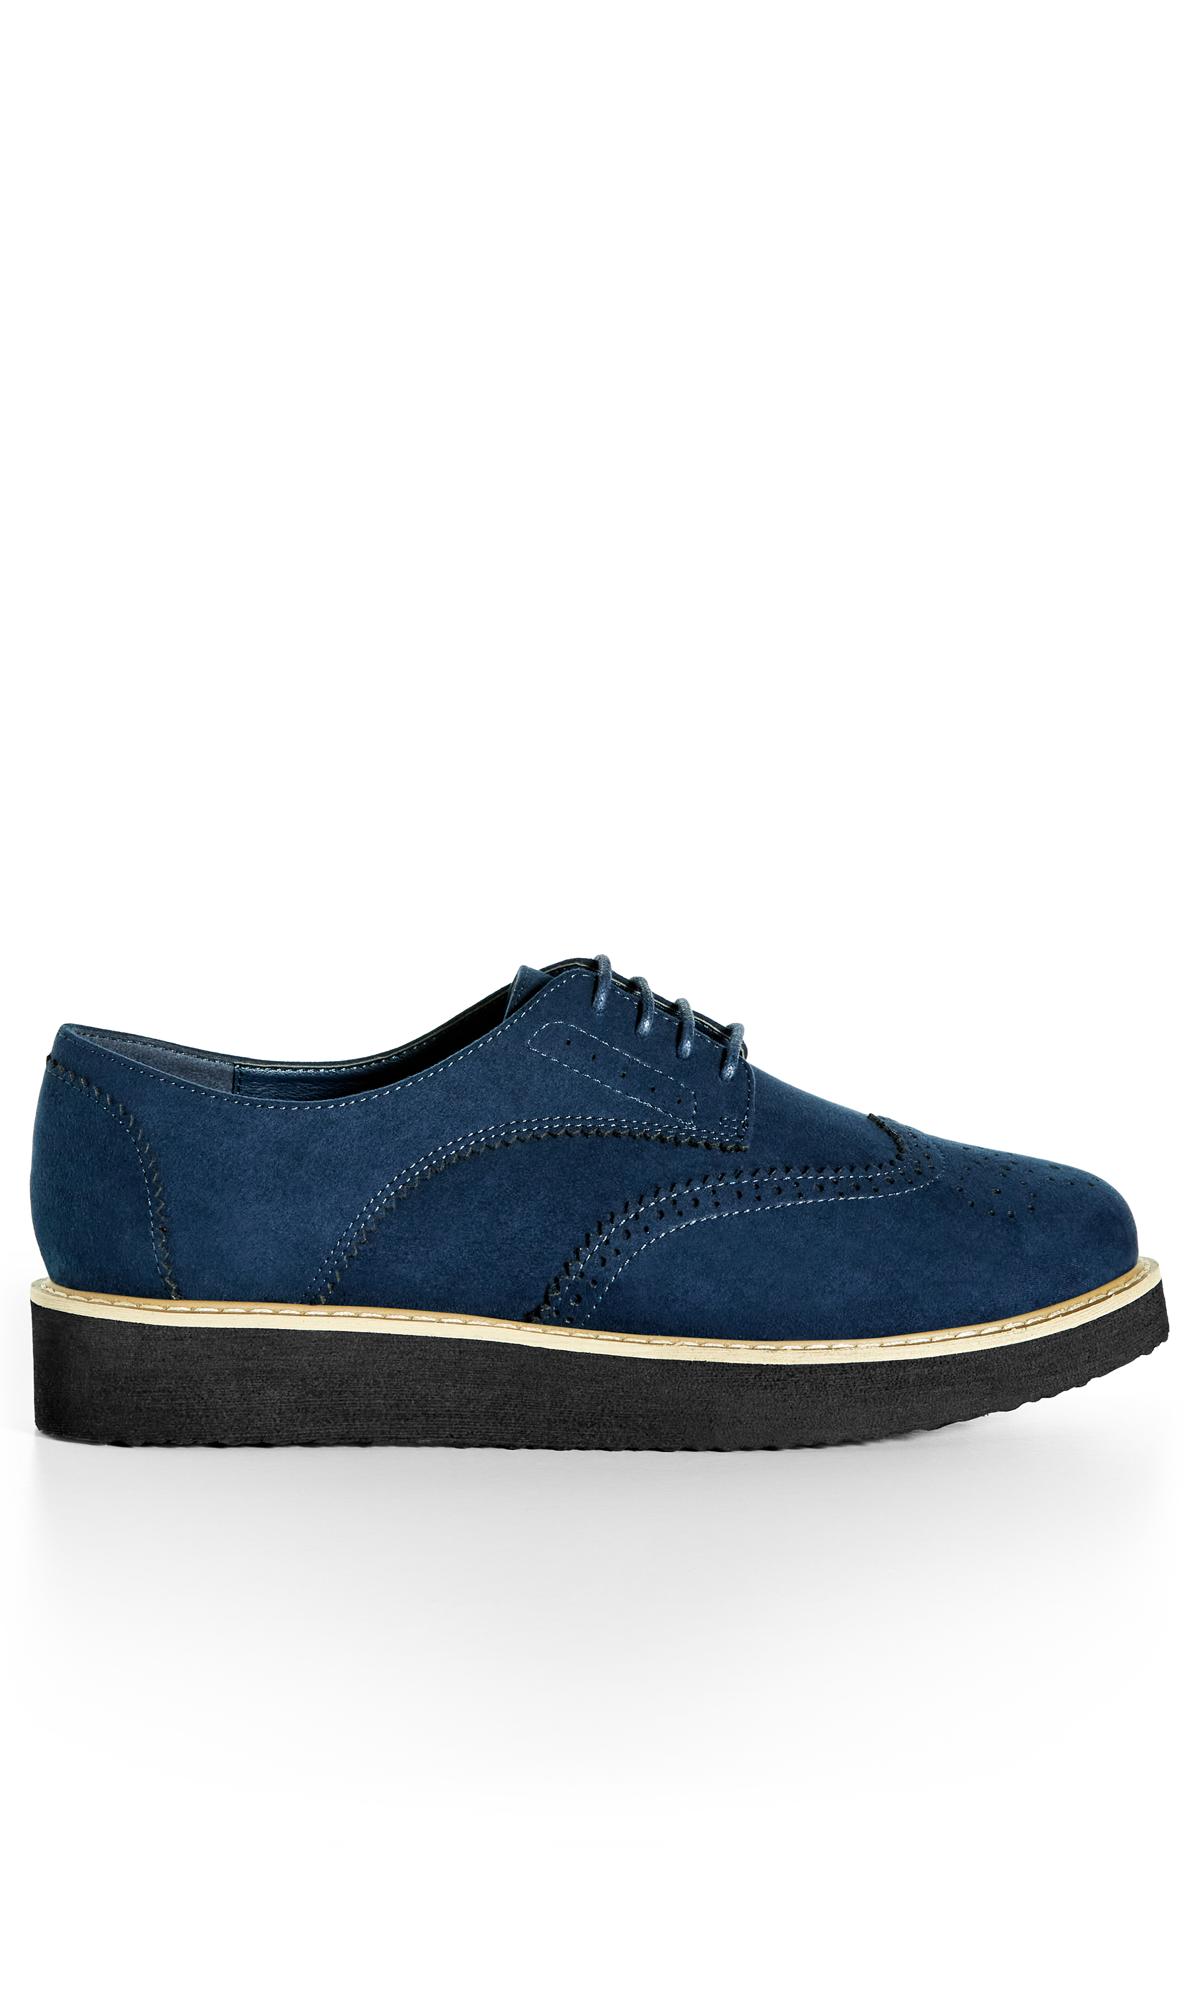 Greer Navy Brogue Wide Fit Shoes 2